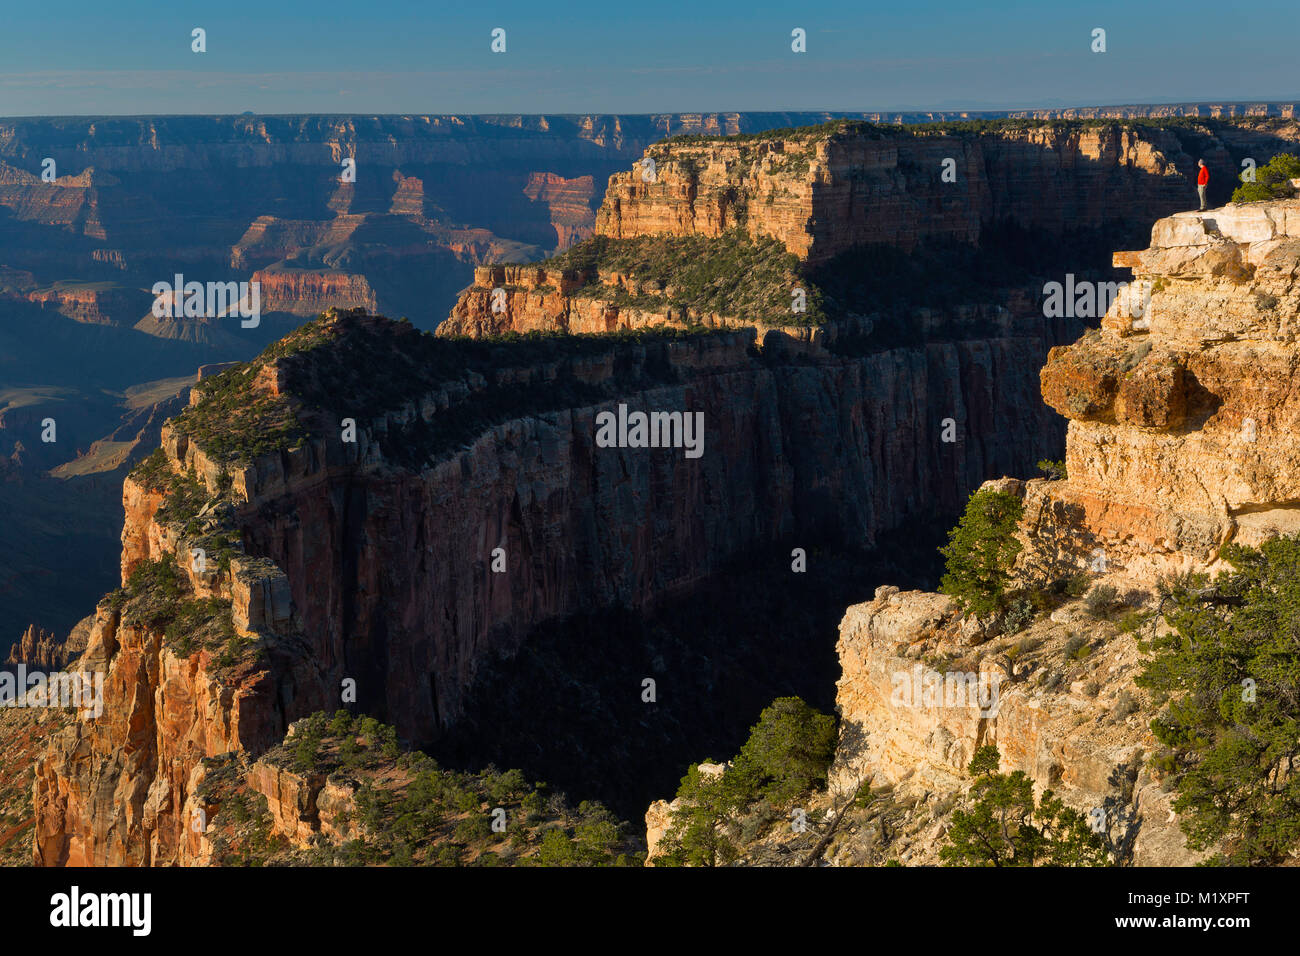 Adrian Klein stands along the edge of the north rim of the Grand Canyon. Arizona, USA Stock Photo